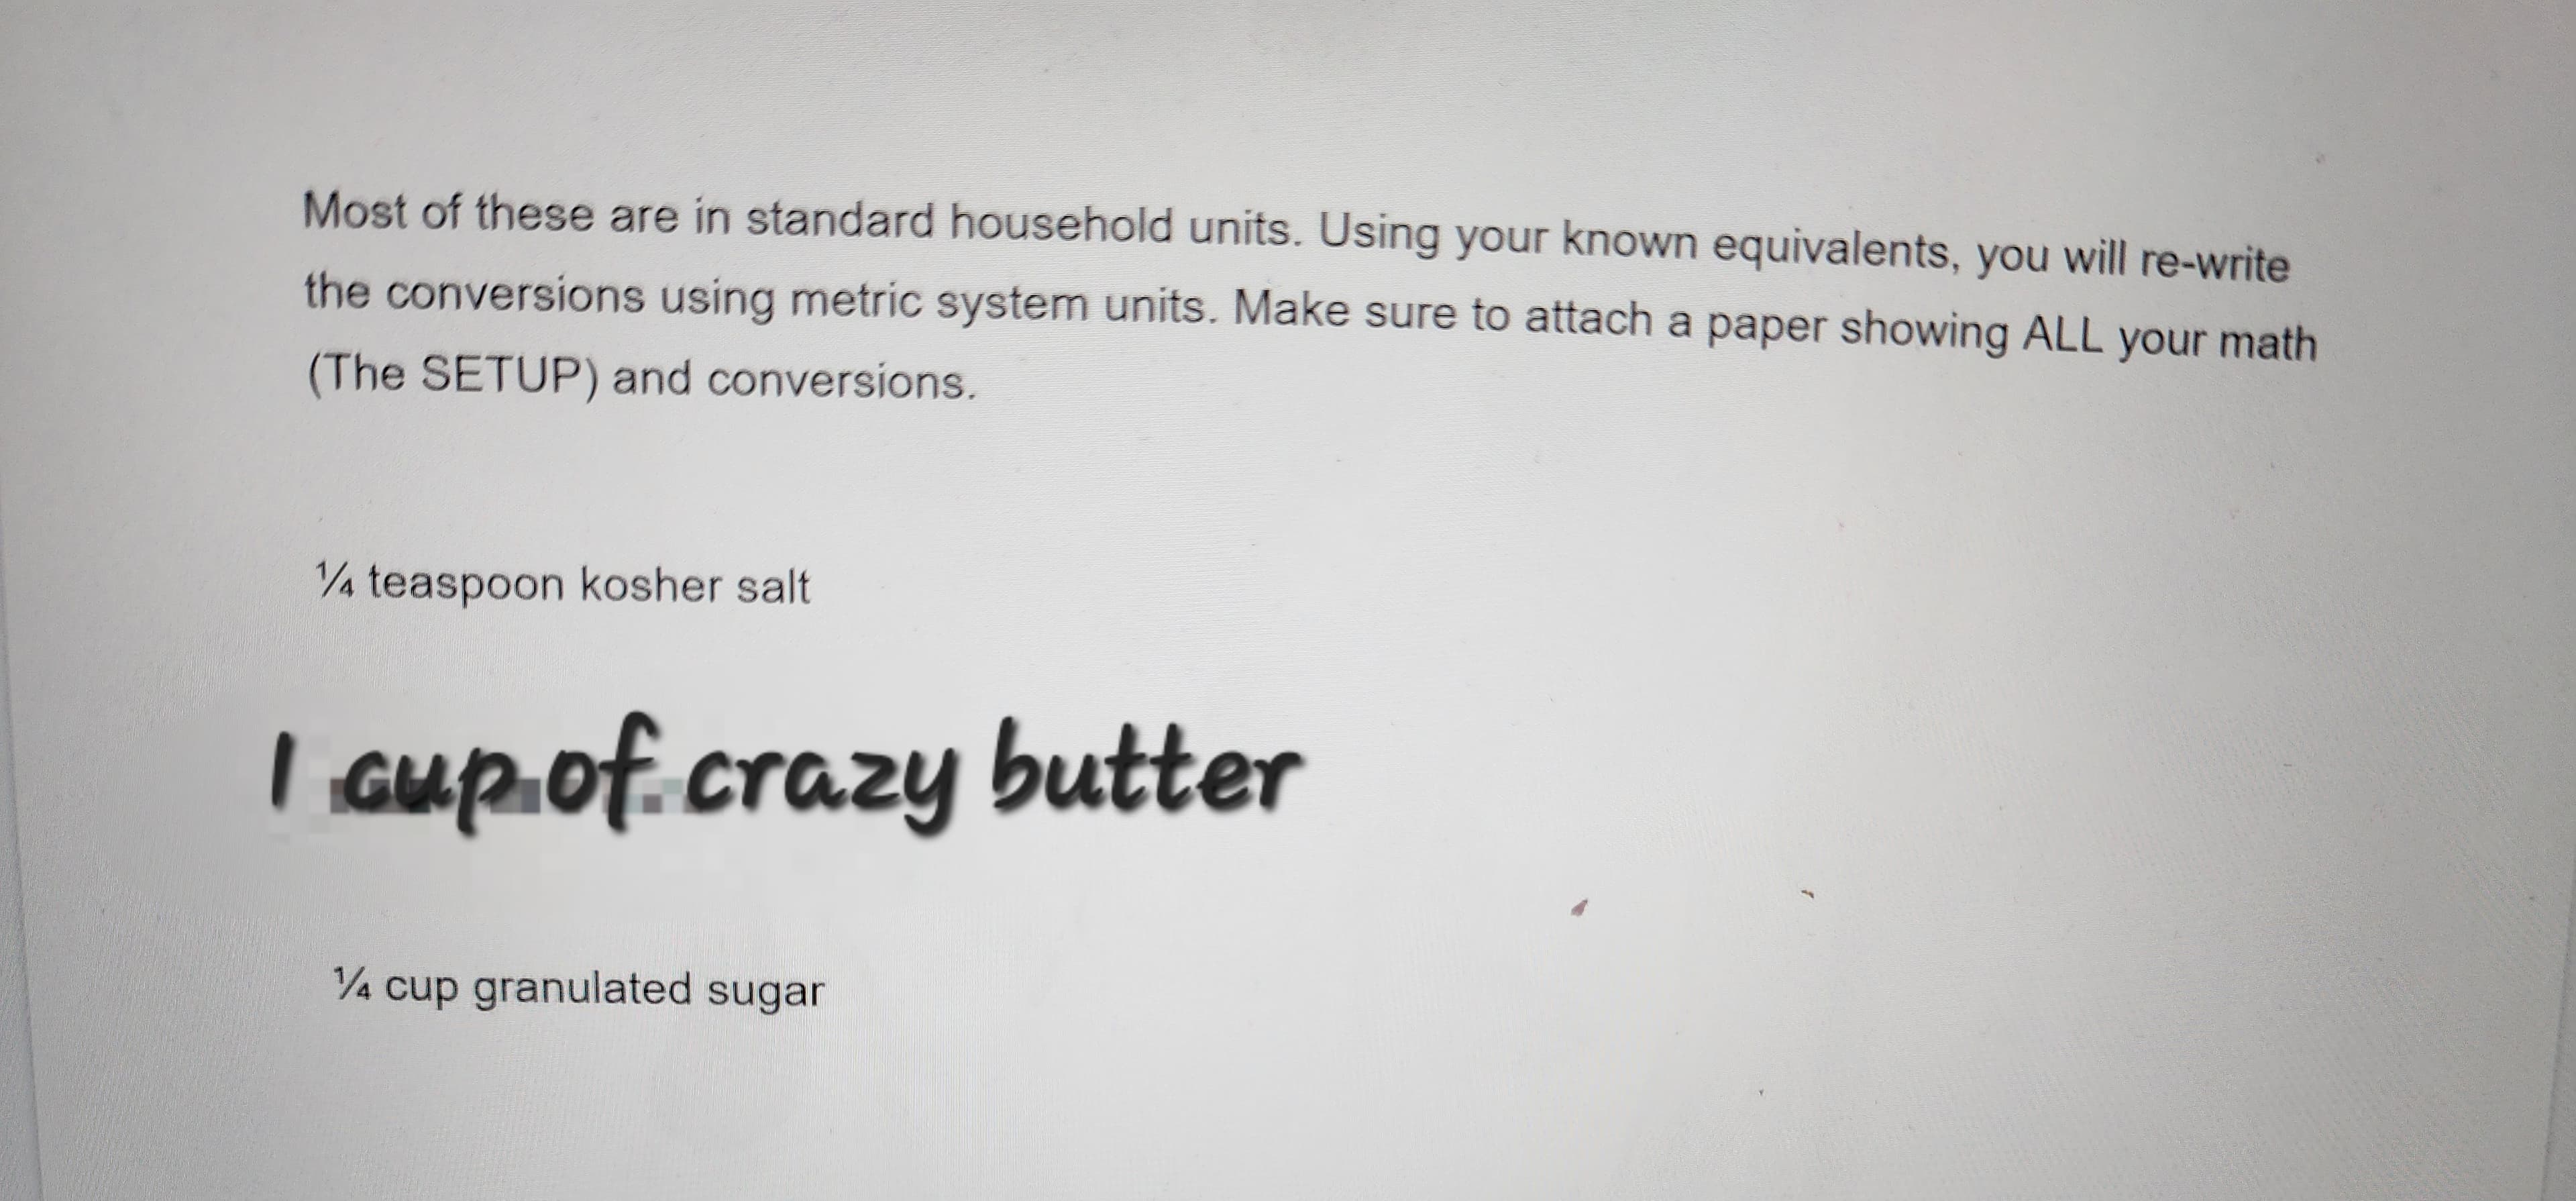 Most of these are in standard household units. Using your known equivalents, you will re-write
the conversions using metric system units. Make sure to attach a paper showing ALL your math
(The SETUP) and conversions.
1/4 teaspoon kosher salt
I cup of crazy butter
1/4 cup granulated sugar